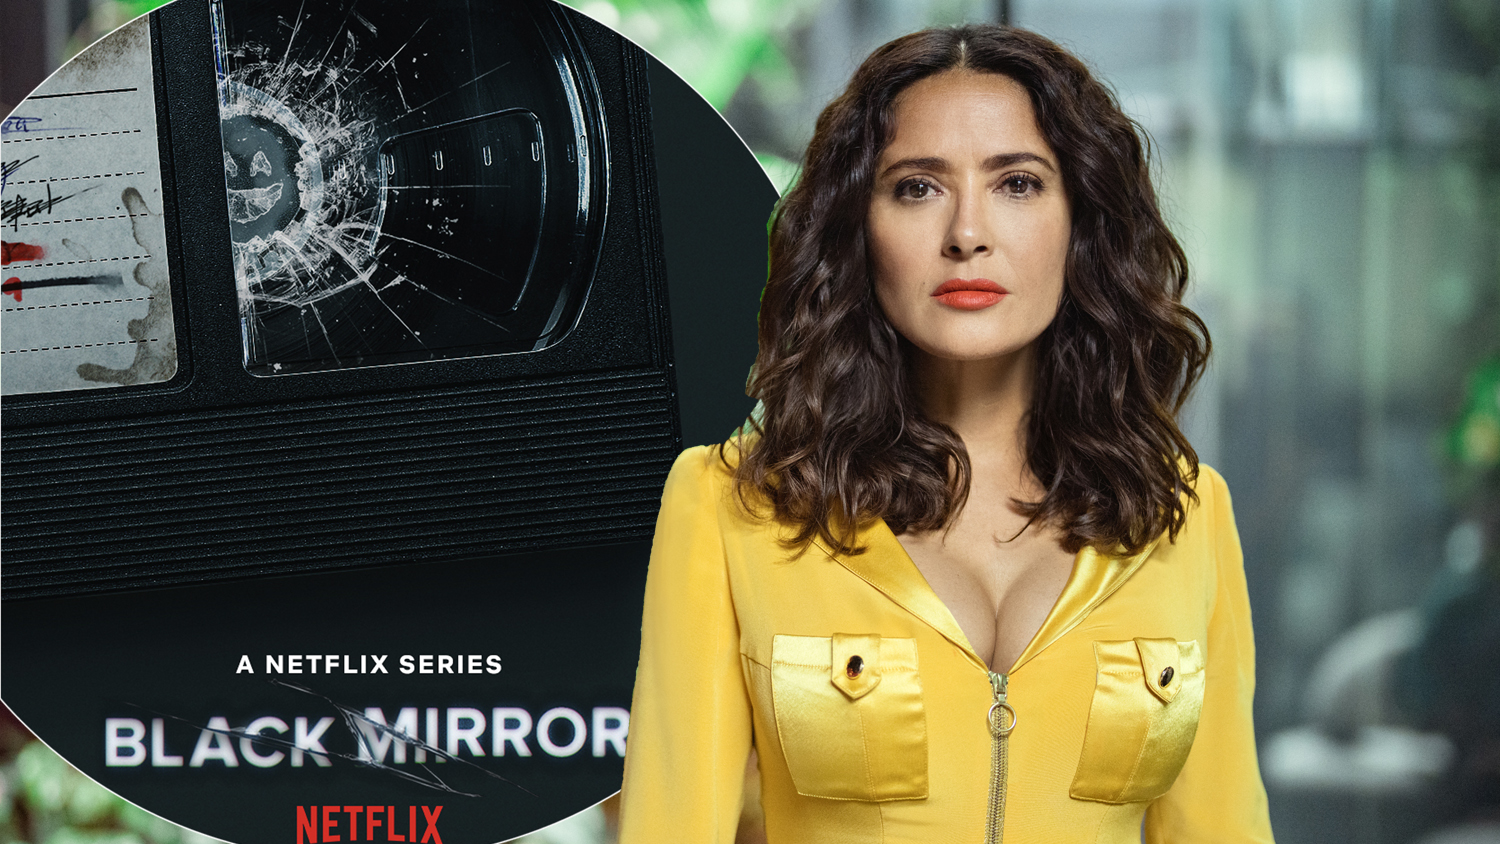 Black Mirror series 6 is out now on Netflix